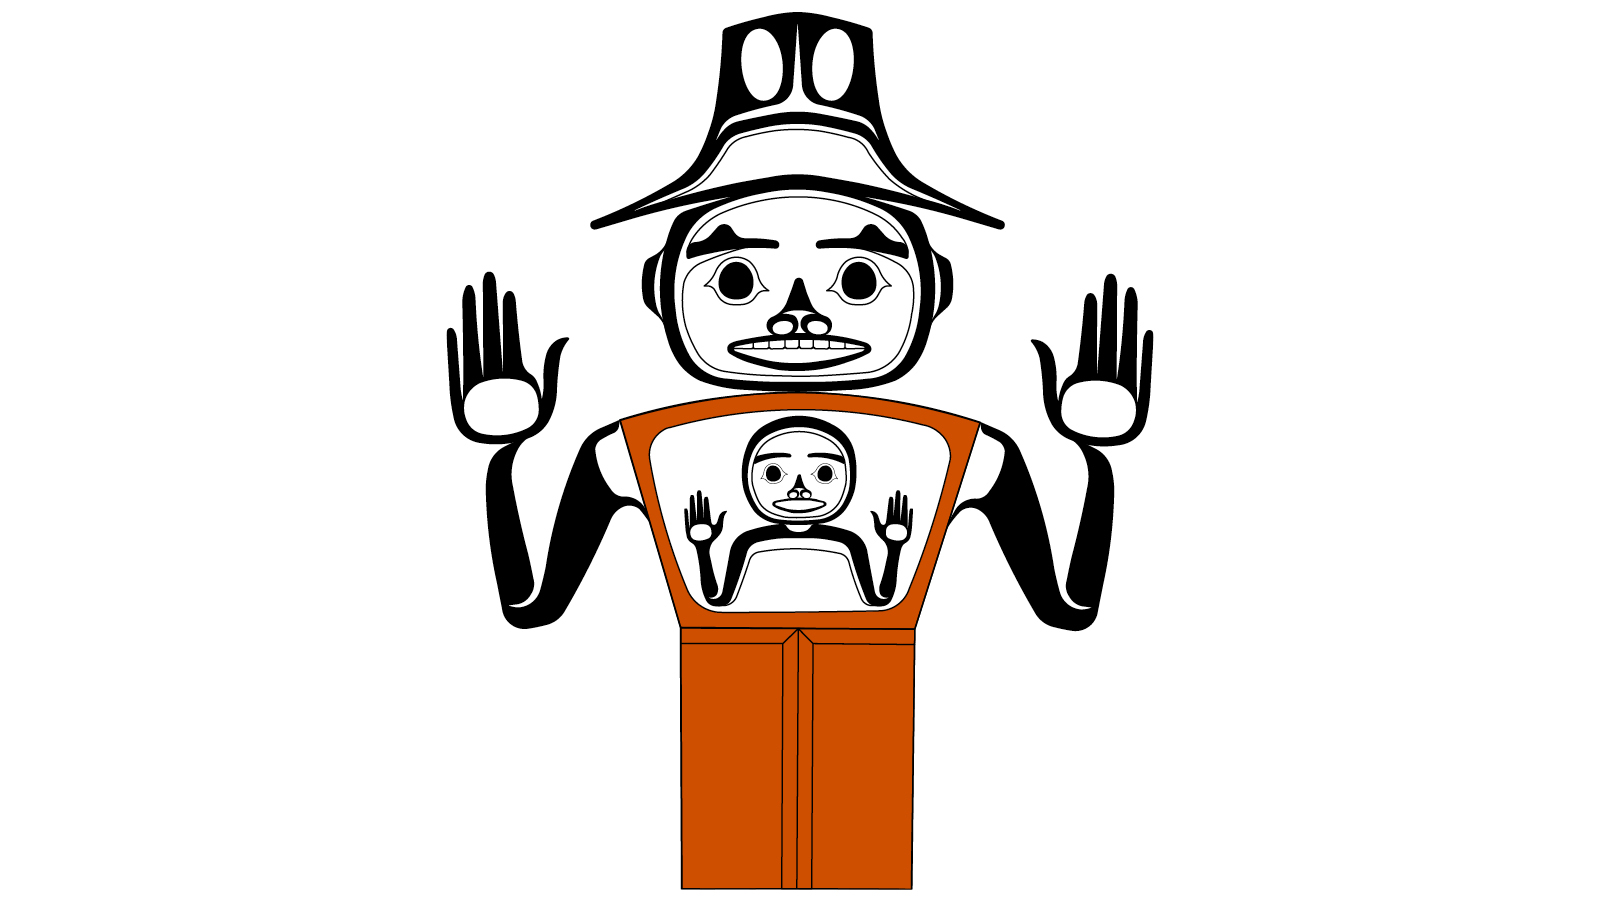 Haisla (First Nation) stylized person with hat and raised hands. A stylized child's image is inside chest.